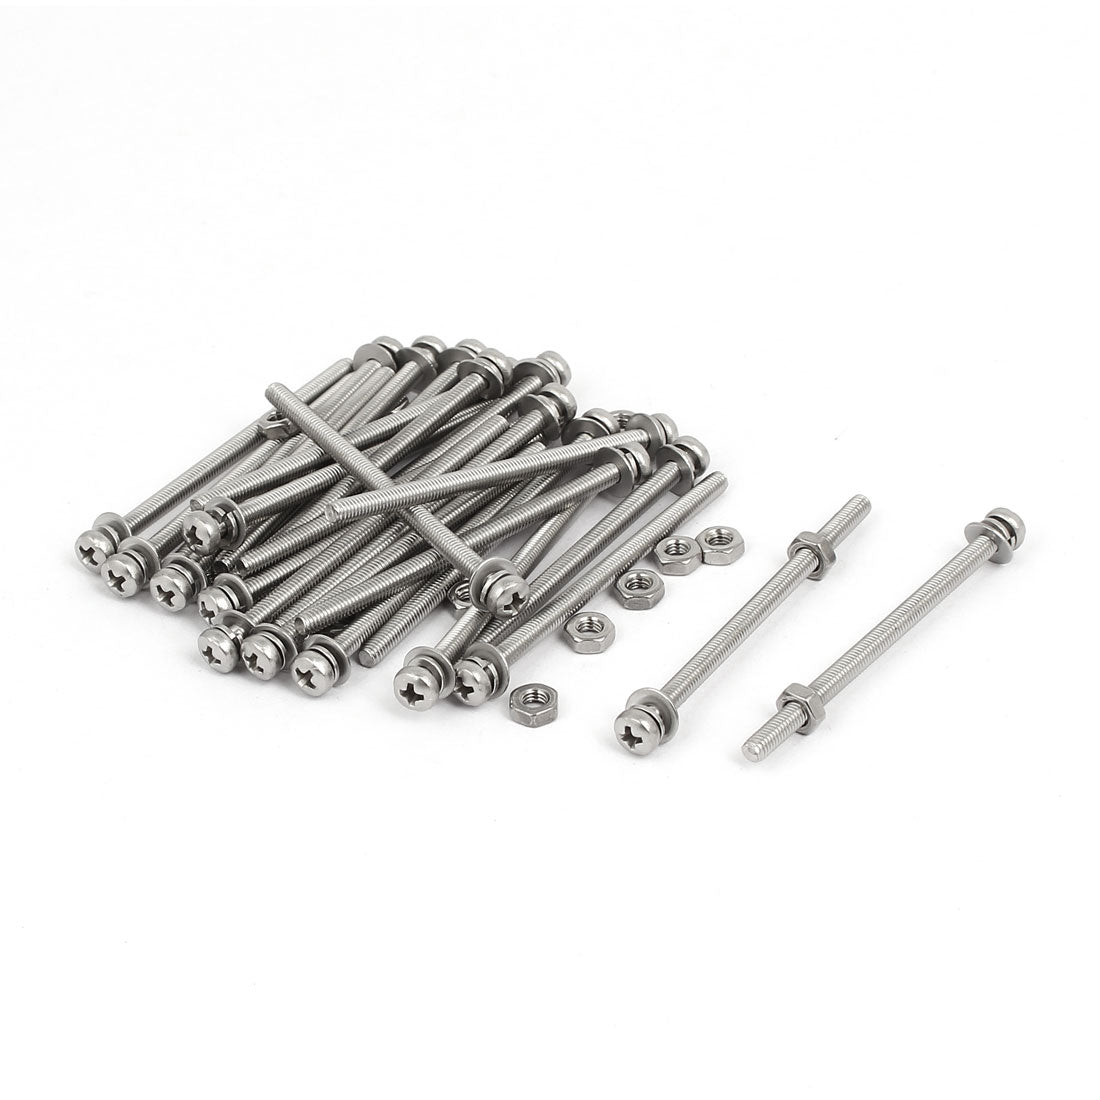 uxcell Uxcell M3 x 50mm 304 Stainless Steel Phillips Pan Head Screws Nuts w Washers 25 Sets